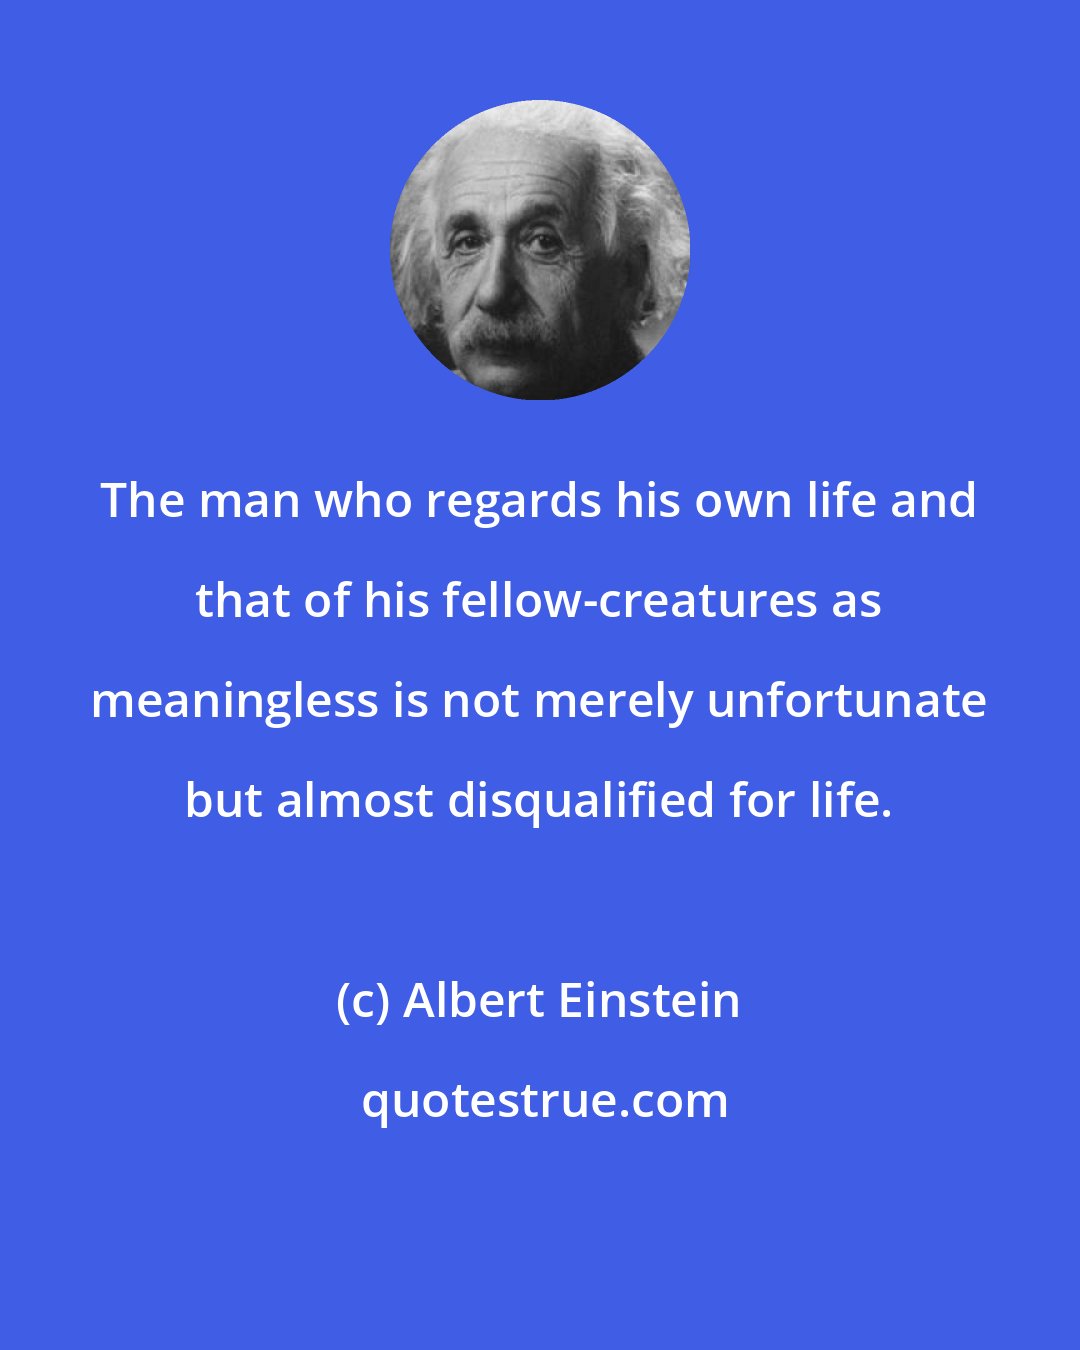 Albert Einstein: The man who regards his own life and that of his fellow-creatures as meaningless is not merely unfortunate but almost disqualified for life.